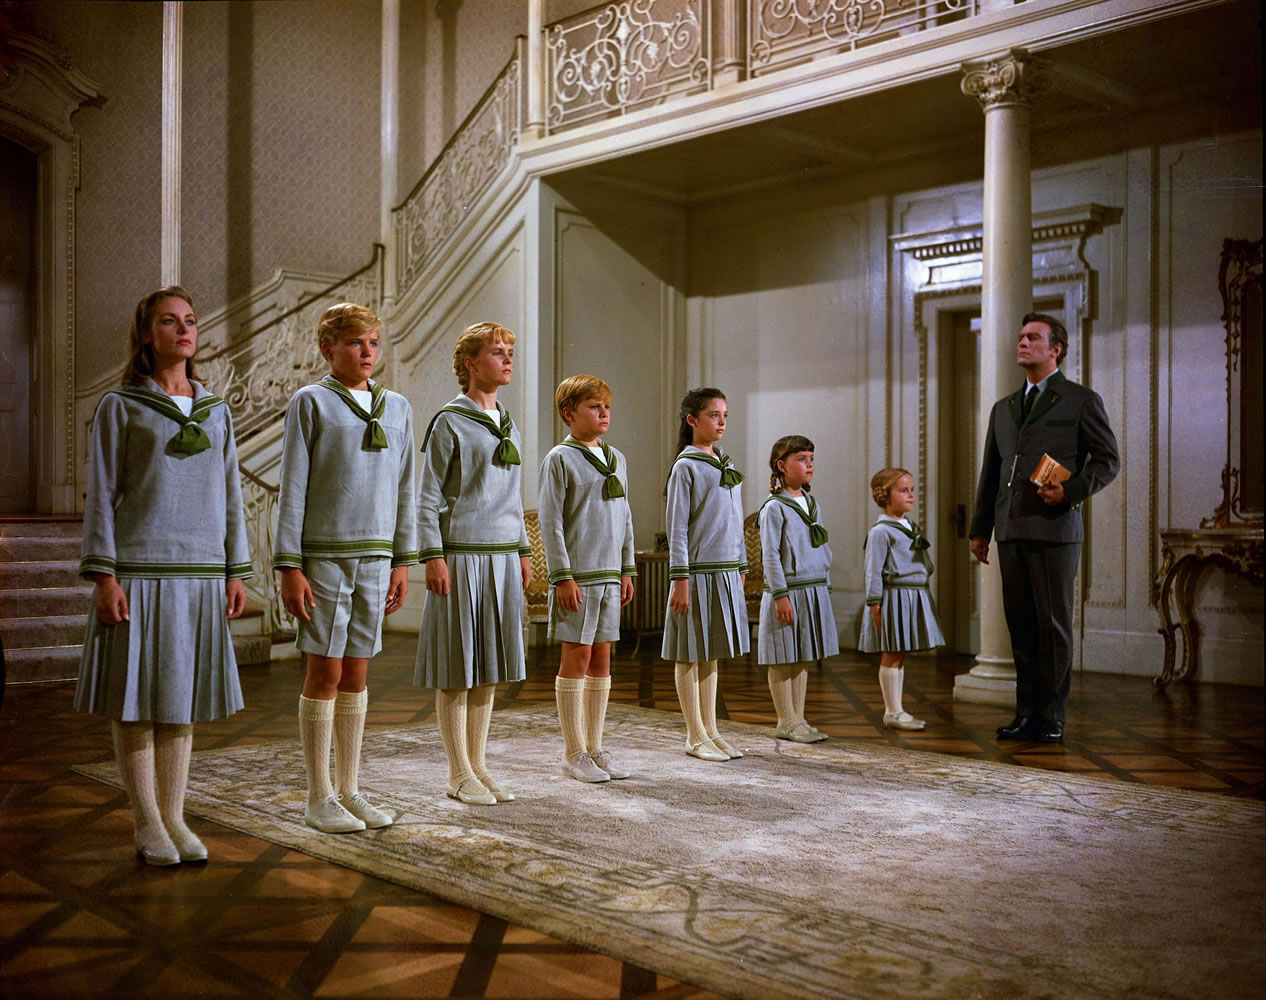 Twentieth Century Fox Home Entertainment
Charmian Carr as Liesl, from left, Nicholas Hammond as Friedrich, Heather Menzies as Louisa, Duane Chase as Kurt, Angela Cartwright as Brigitta, Debbie Turner as Marta, Kym Karath as Gretl, and Christopher Plummer as Captain von Trapp, in a scene from the film &quot;The Sound of Music.&quot; The 1965 Oscar-winning film adaptation of the Rodgers